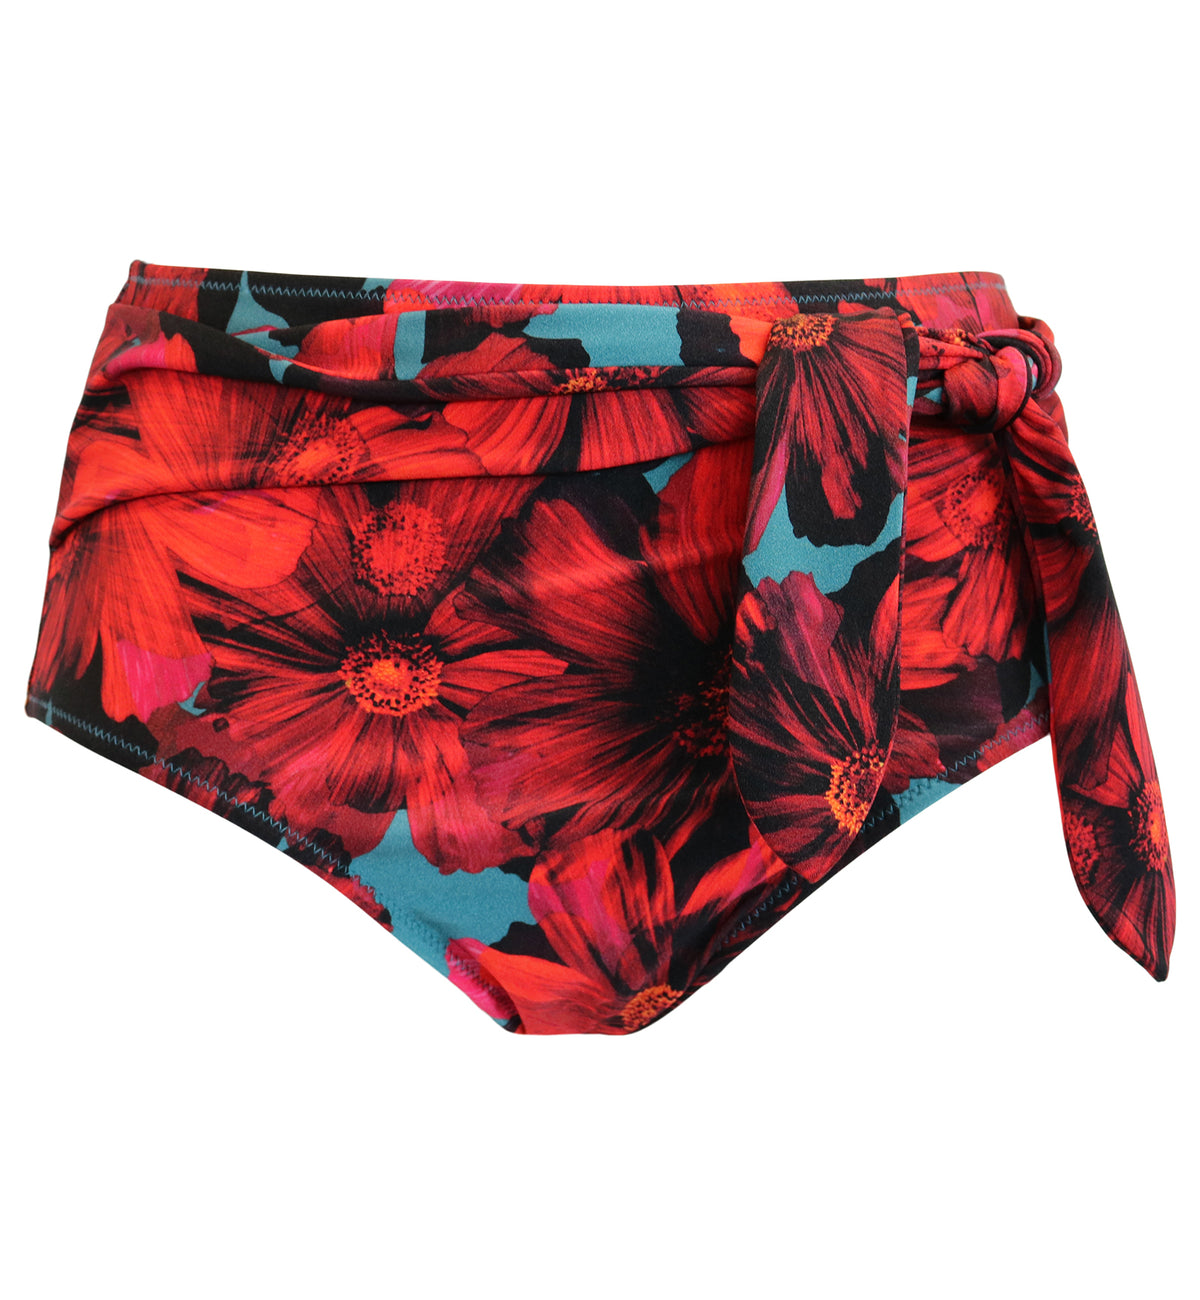 Pour Moi Orchid Luxe High Waist Control Swim Brief (12905),Small,Red/Teal - Red/Teal,Small